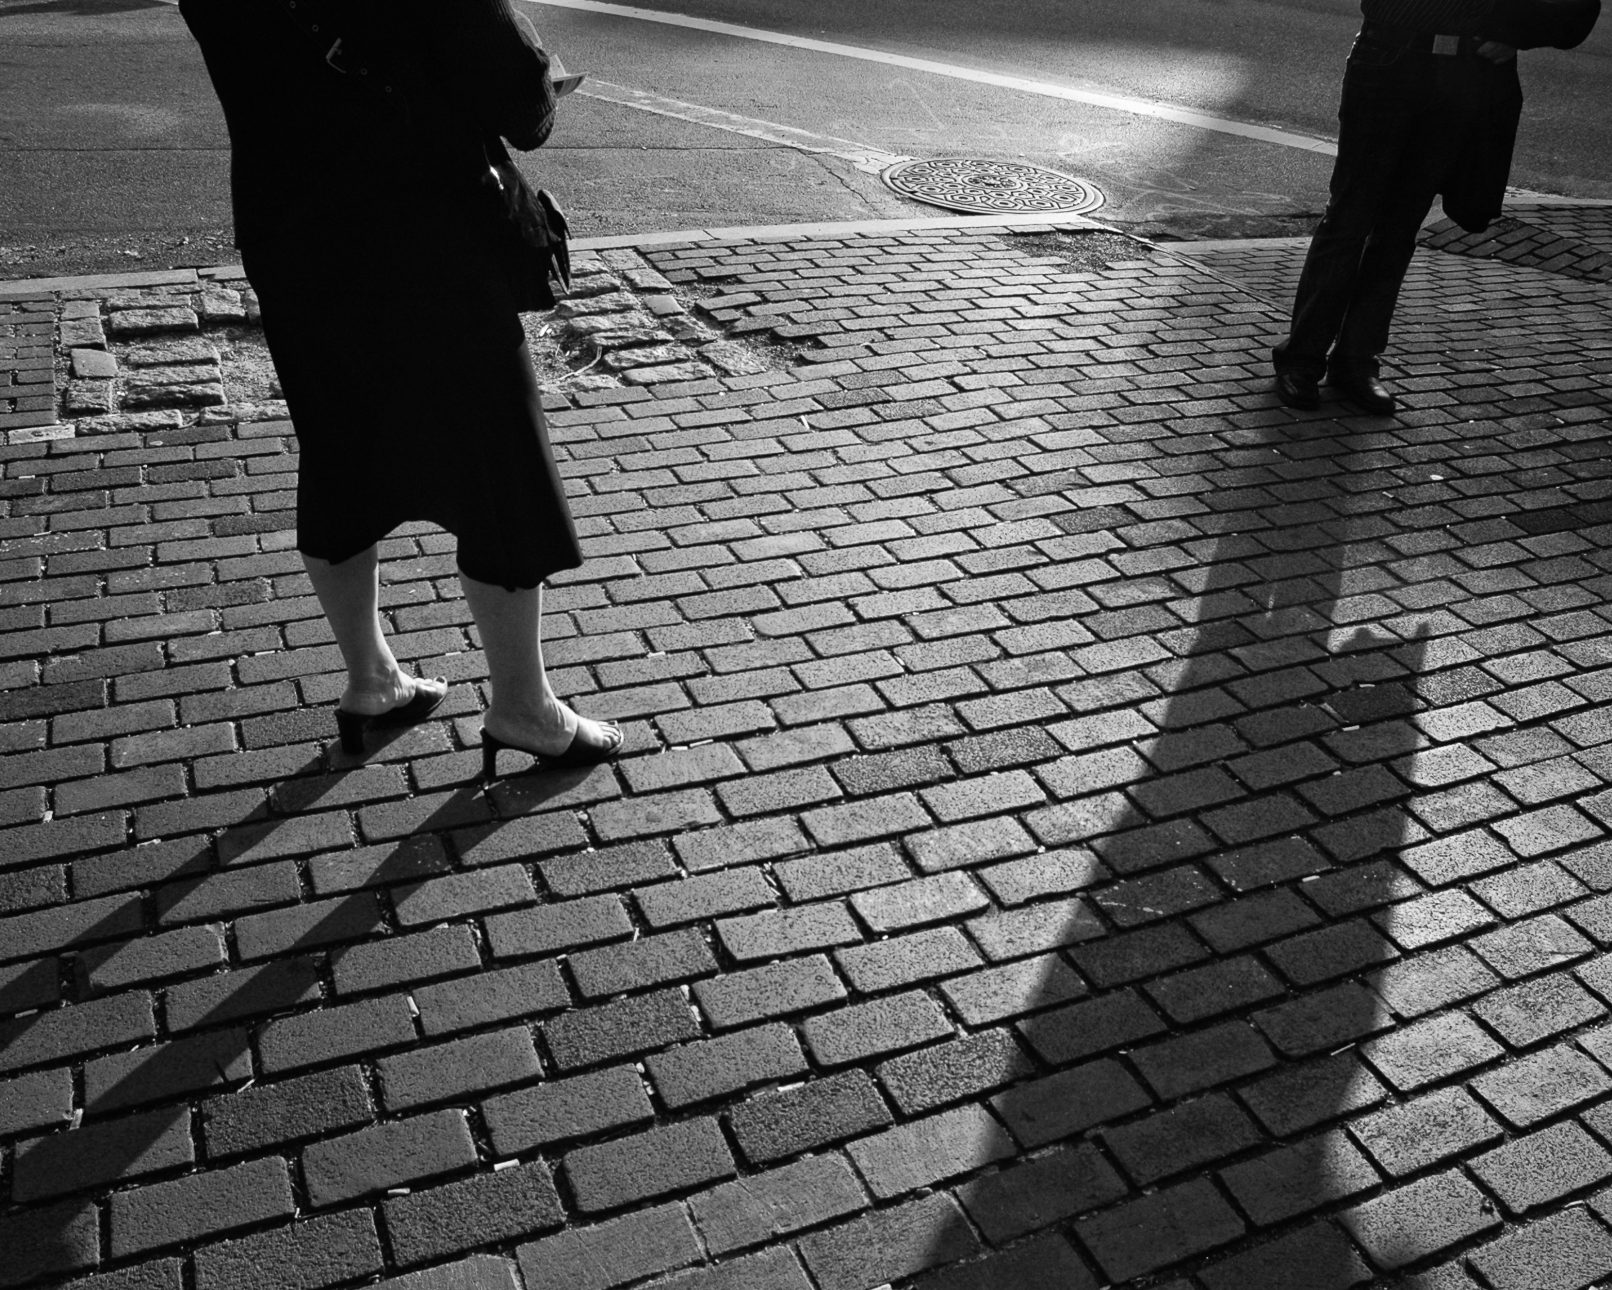 Two people on city street with long shadows